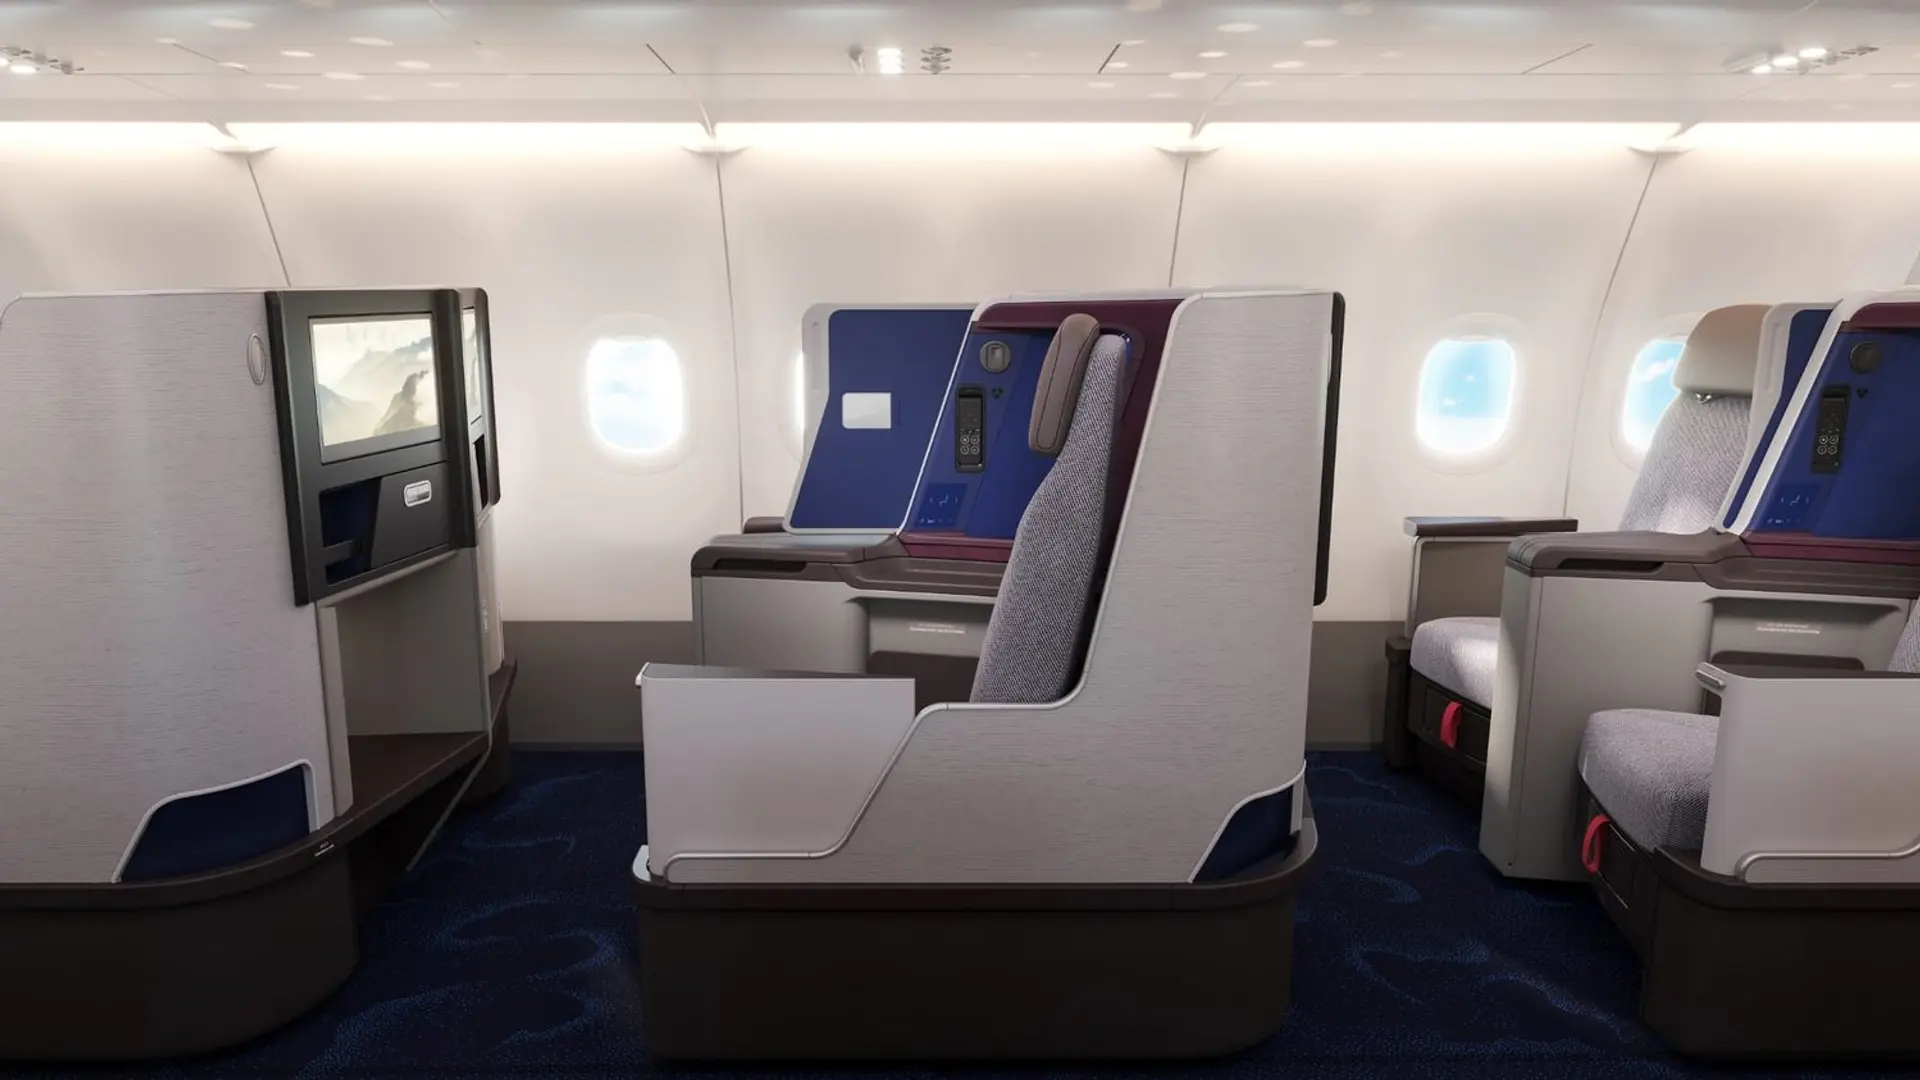 Airlines News - China Airlines unveils flatbeds in its new A321neo Business Class cabin